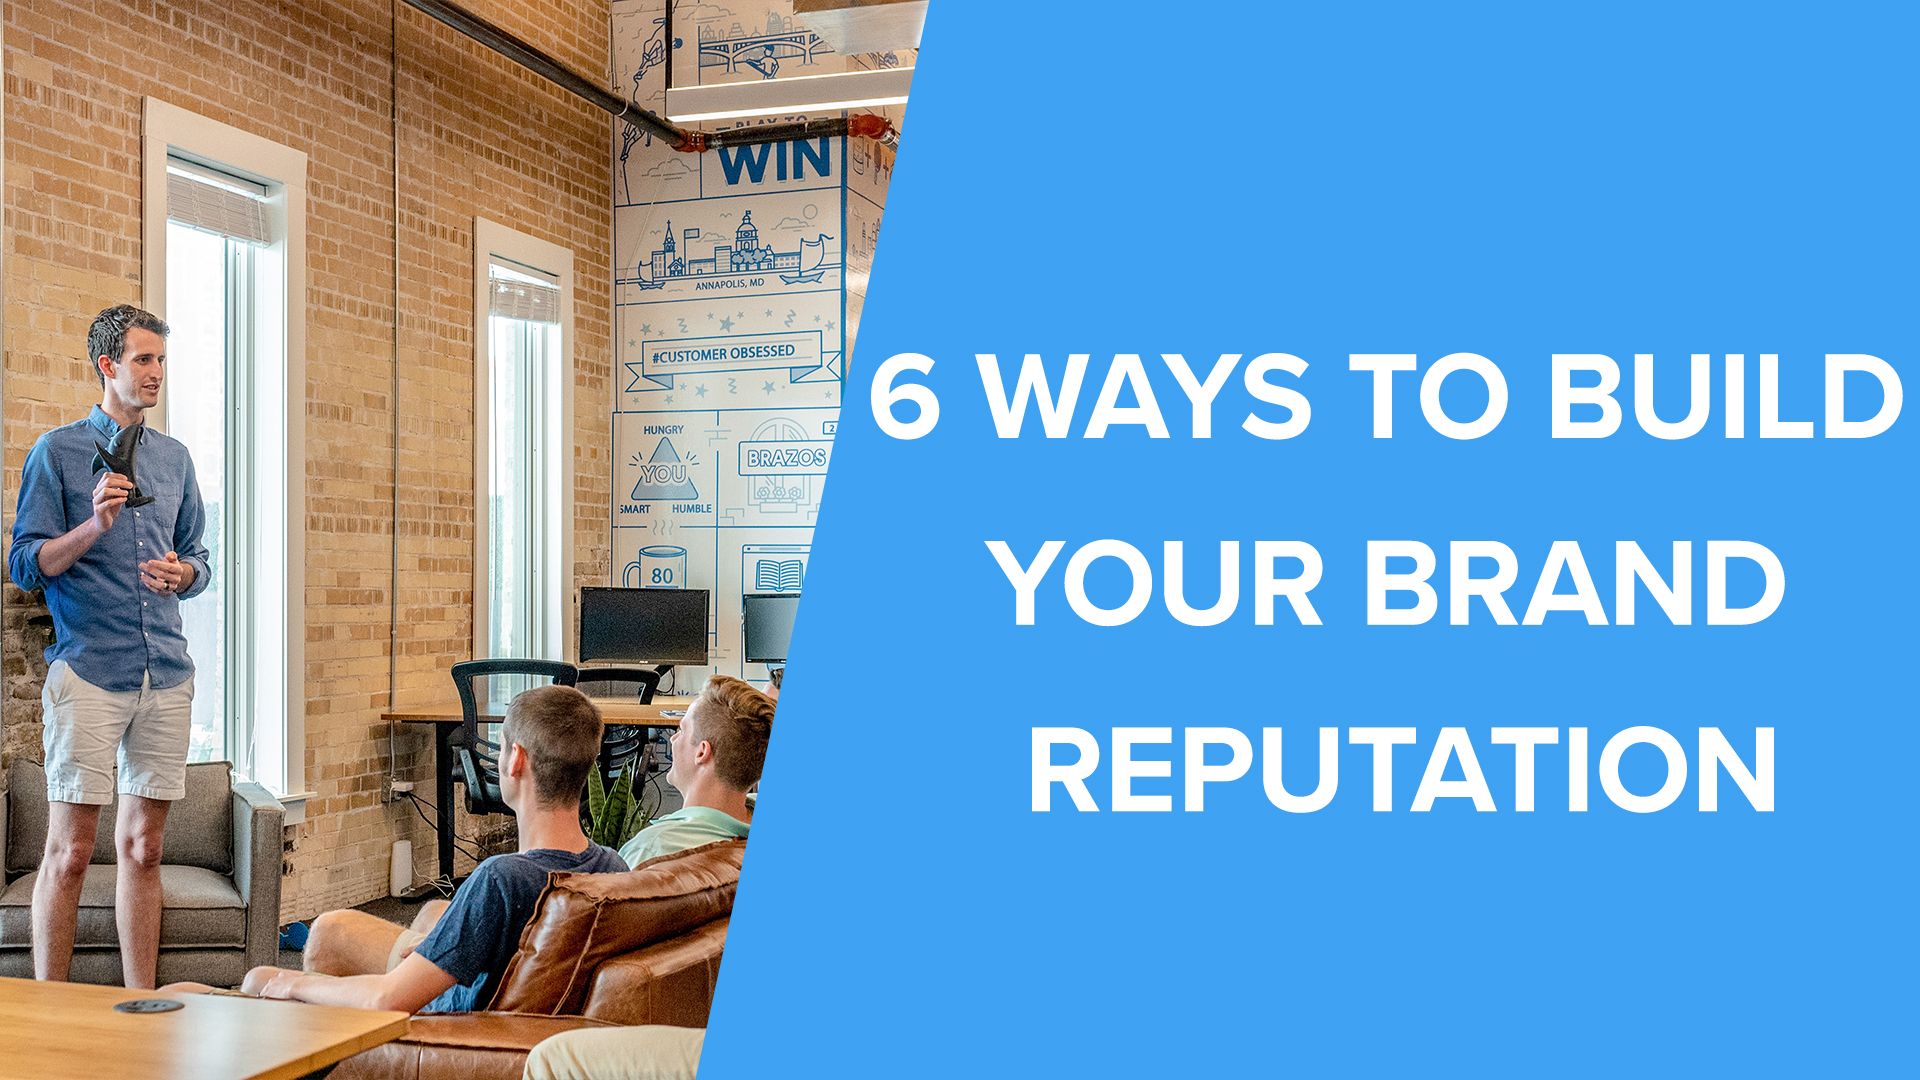 6 Simple But Effective Ways to Build Your Brand Reputation